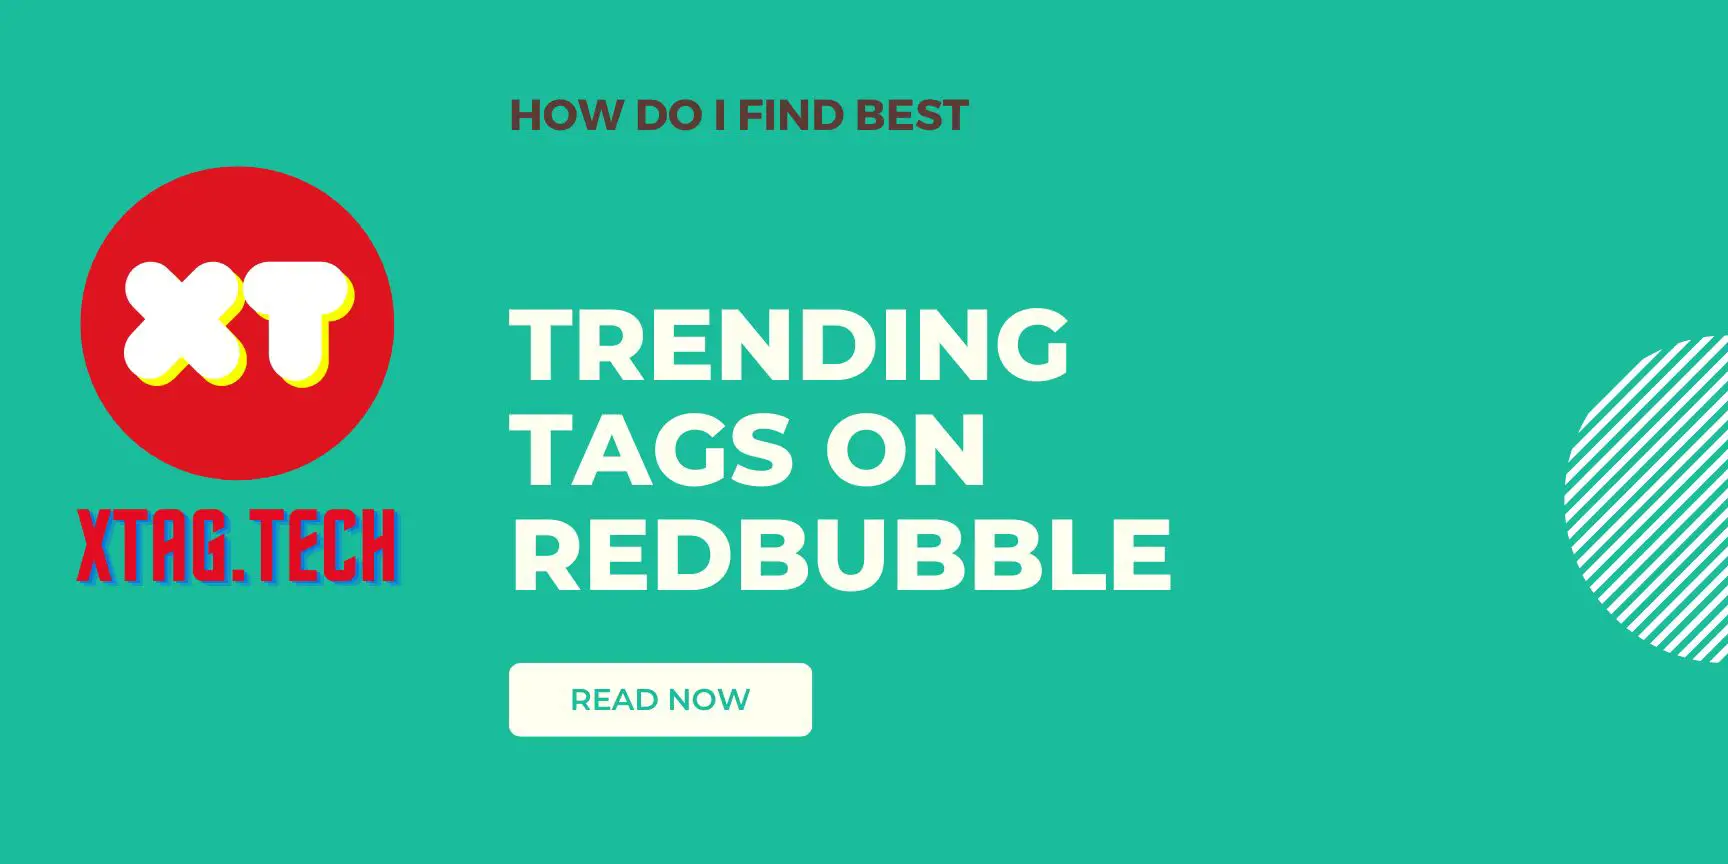 How Do I Find Best Trending Tags On Redbubble? 2022